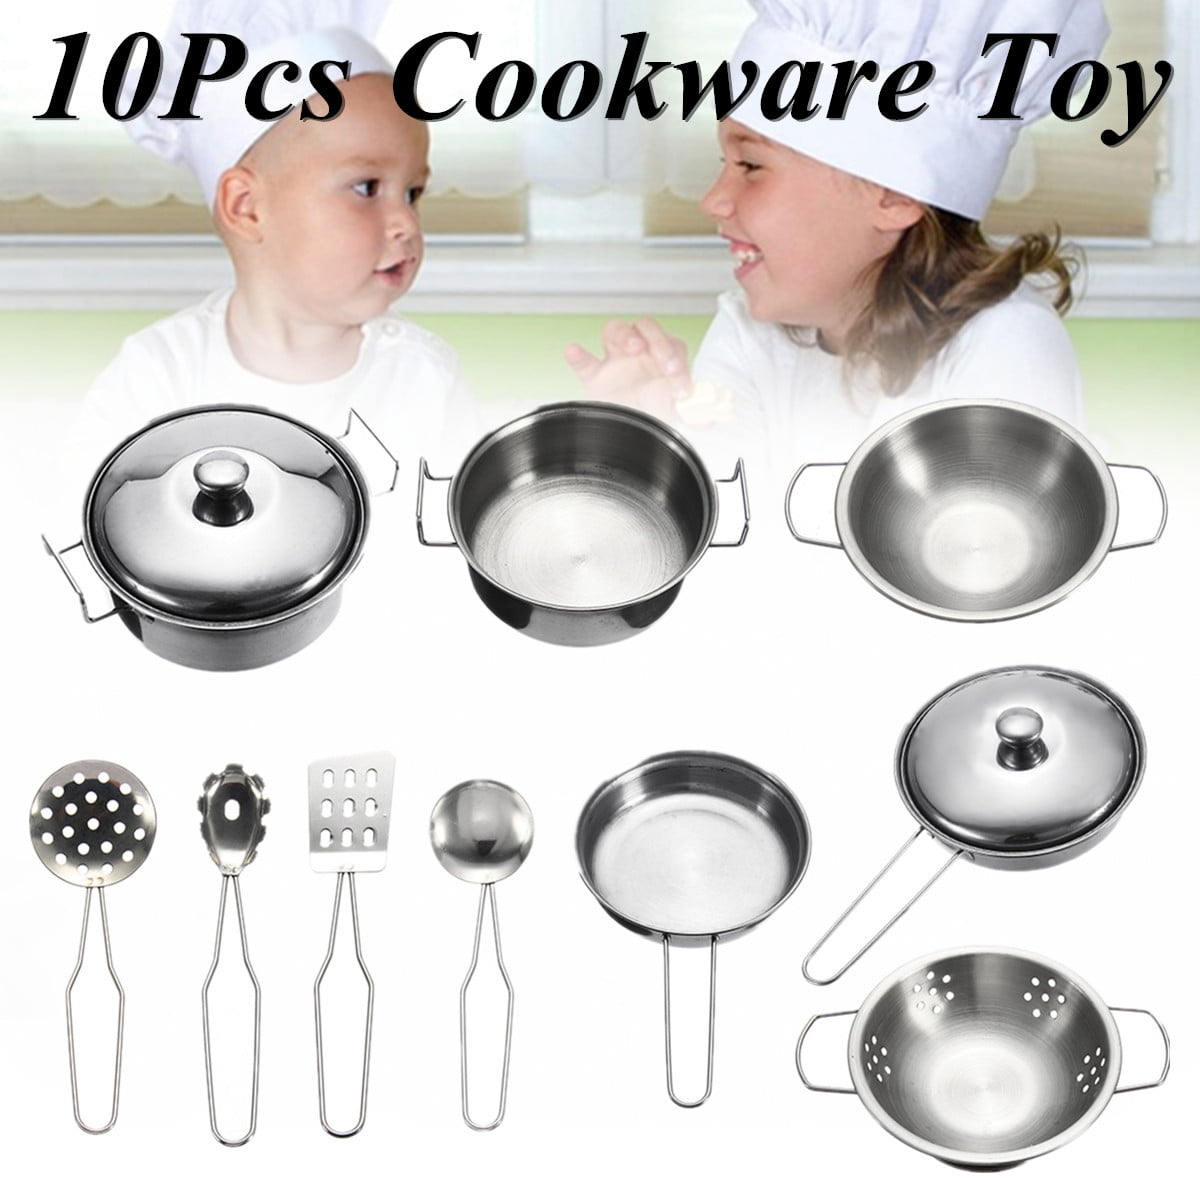 10Pcs Educational Kids Kitchen Toy Set,with Stainless Steel Simulation Cook set 